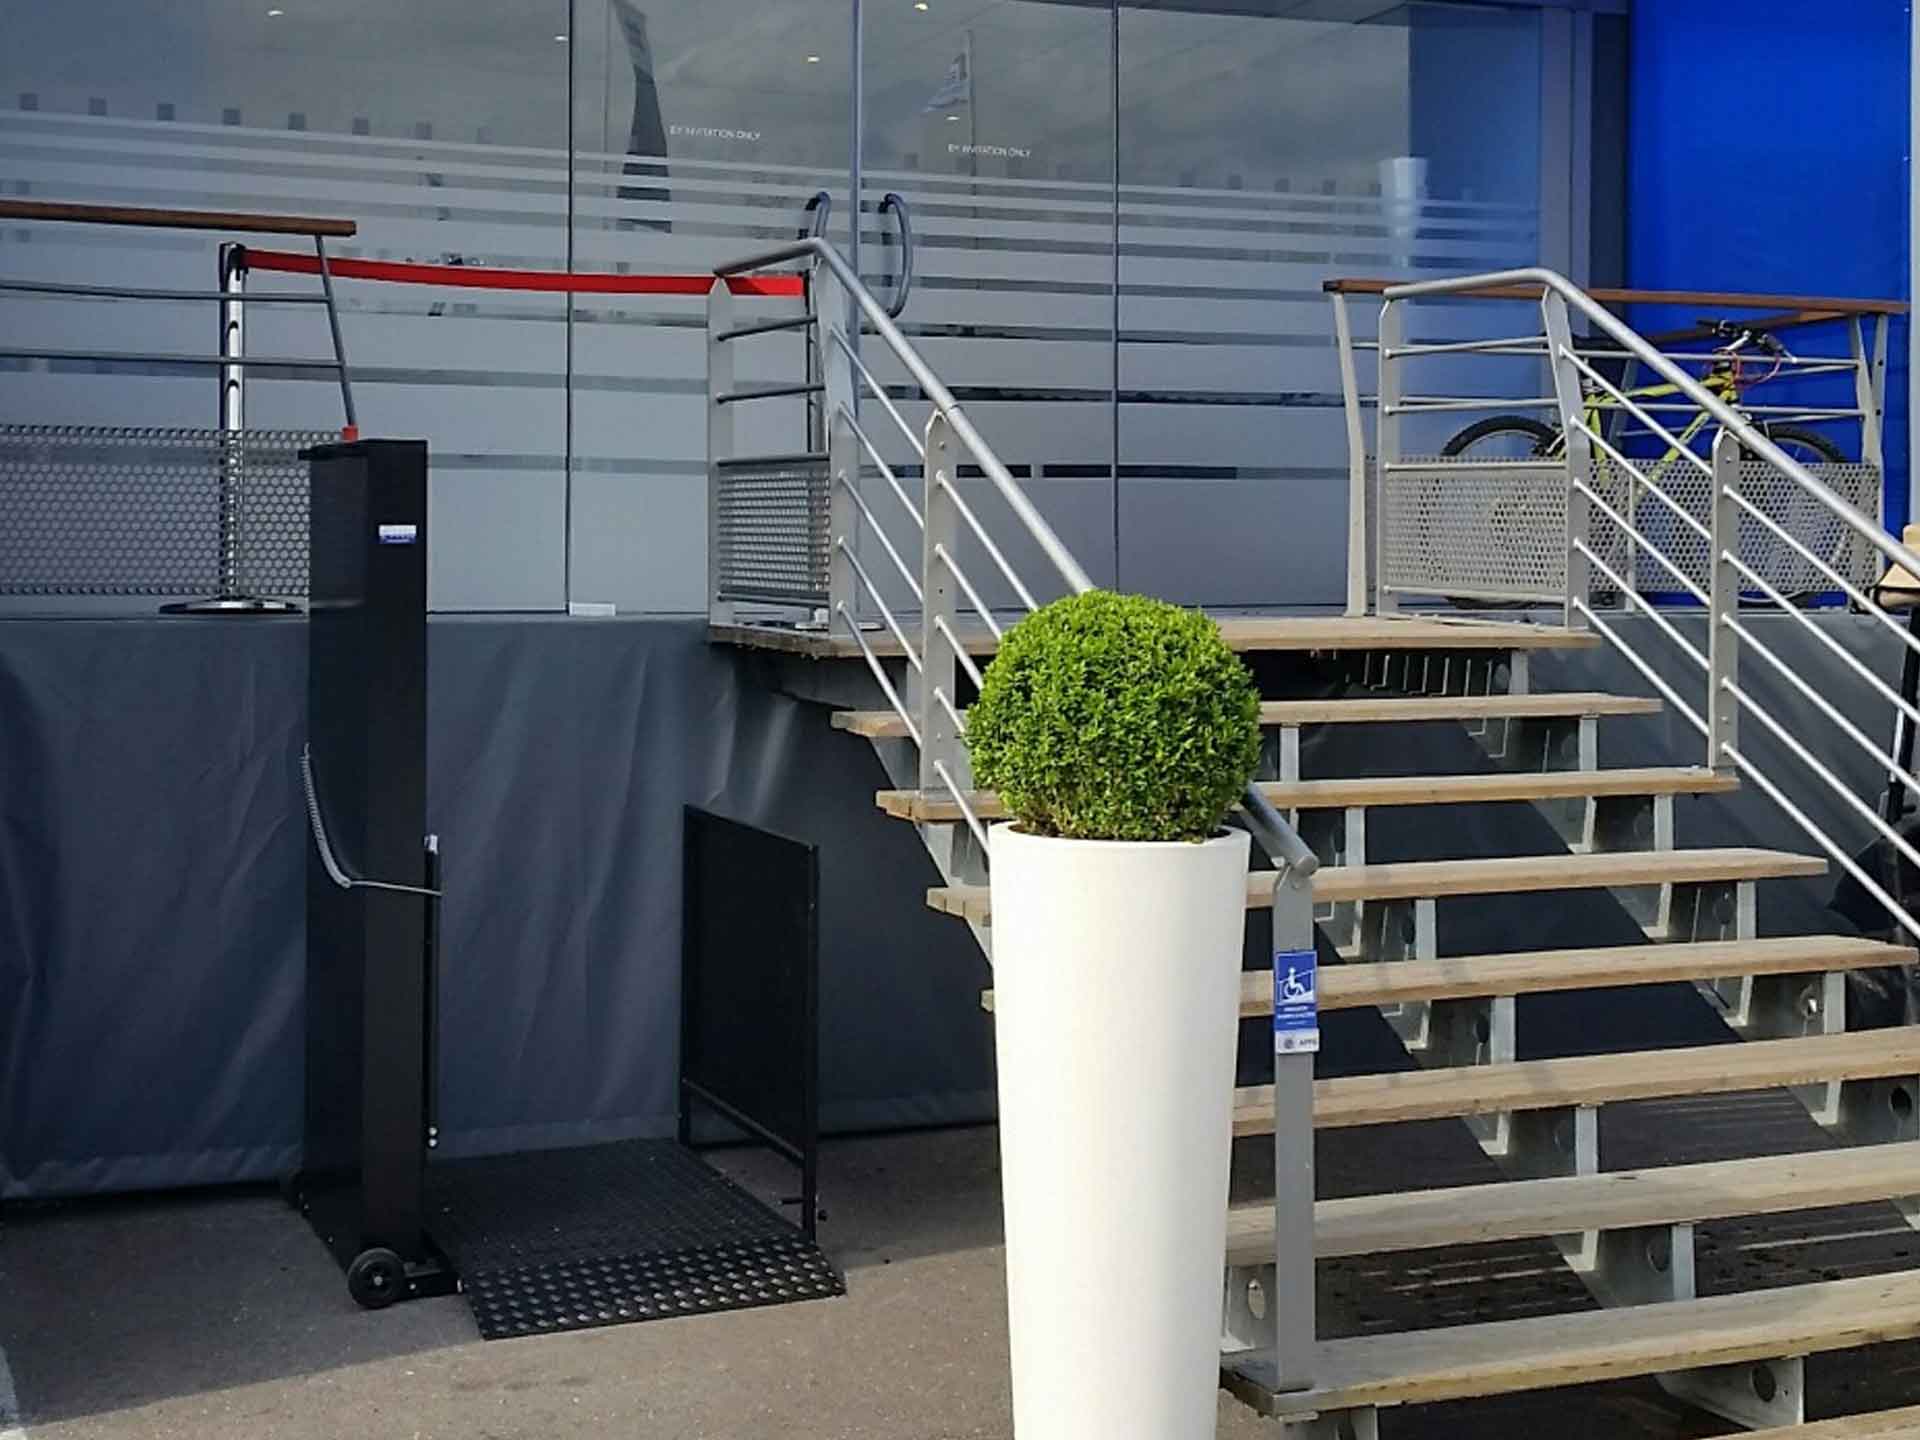 Rent an Orion electric elevator platform, providing disabled and handicapped access to your events, trade shows, seminars, etc. everywhere in France